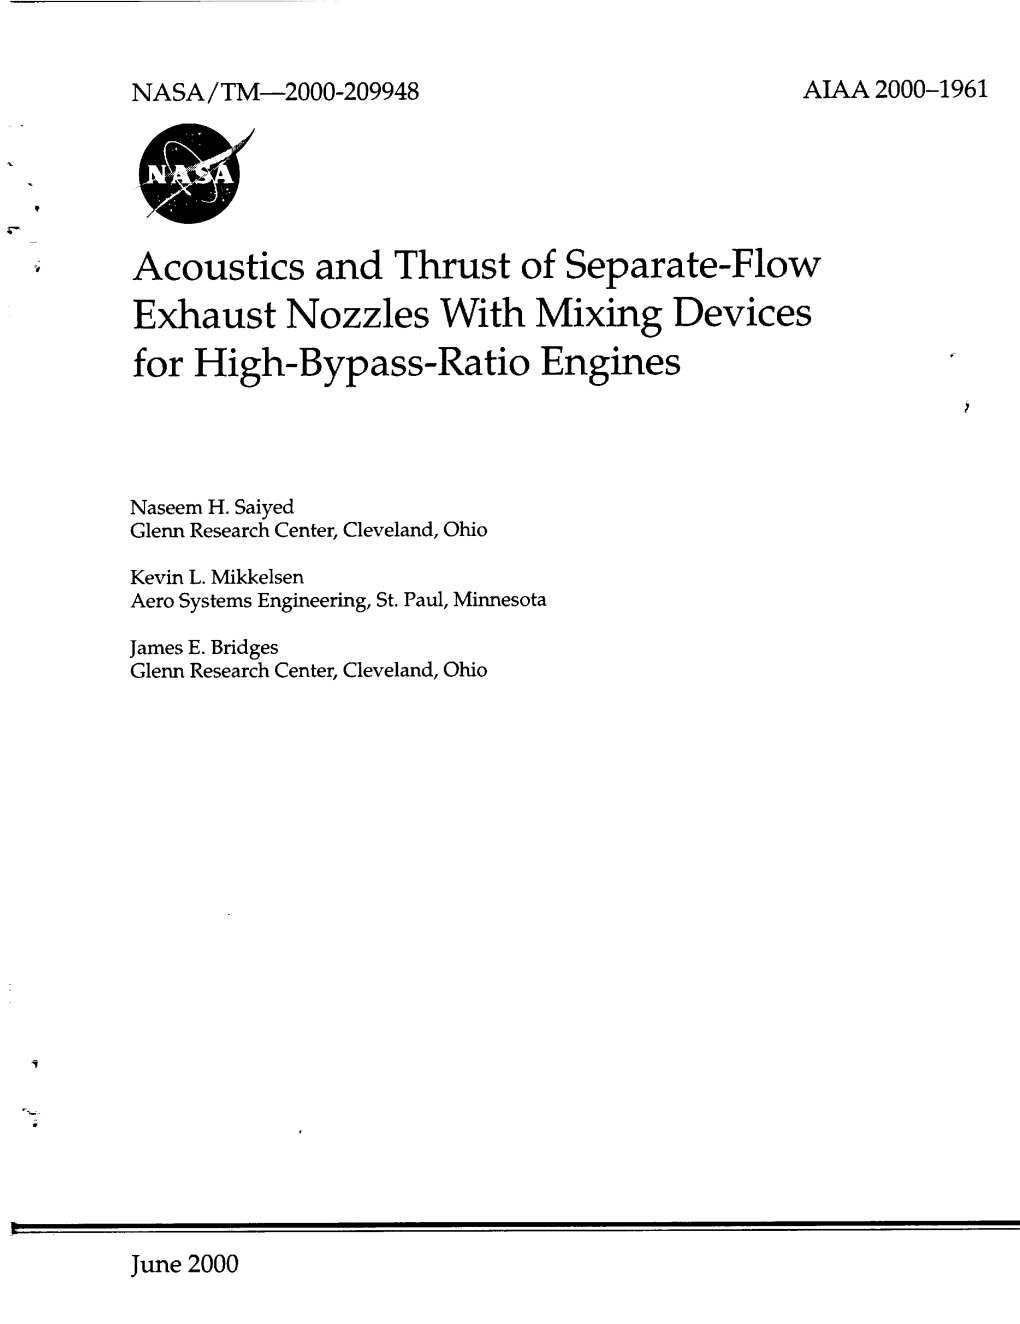 Acoustics and Thrust of Separate-Flow Exhaust Nozzles with Mixing Devices for High-Bypass-Ratio Engines